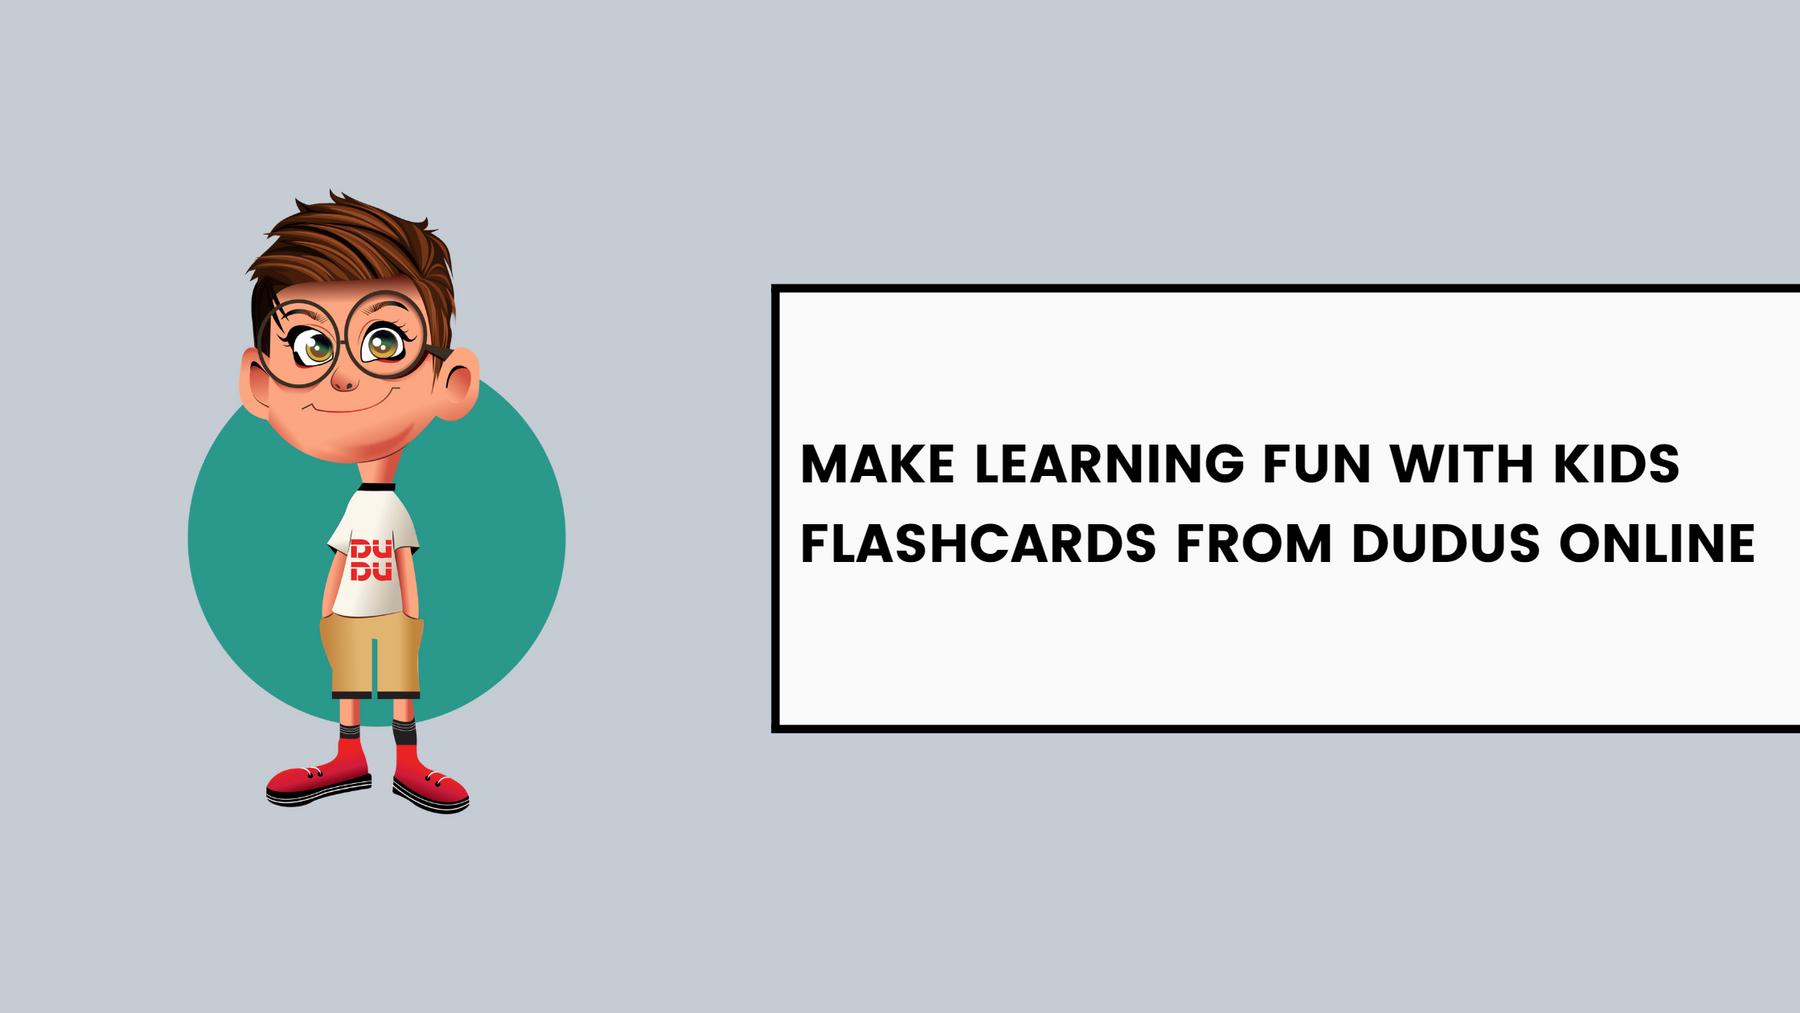 Make Learning Fun With Kids Flashcards From Dudus Online